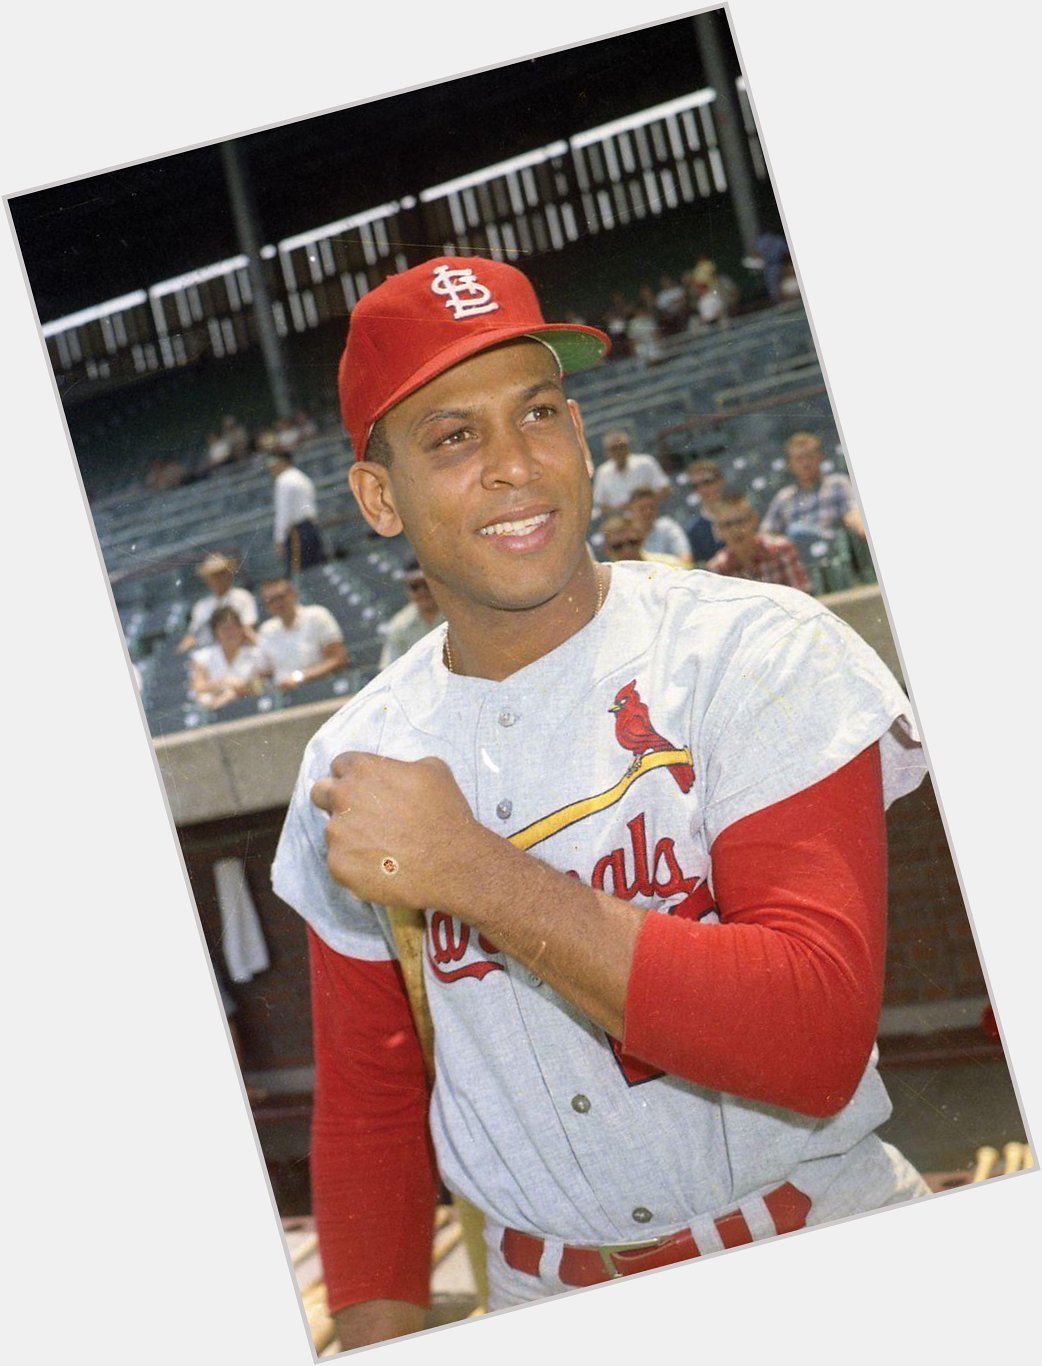 Happy Birthday to HOFer and former Orlando Cepeda. Orlando played for the 1966-1968. 